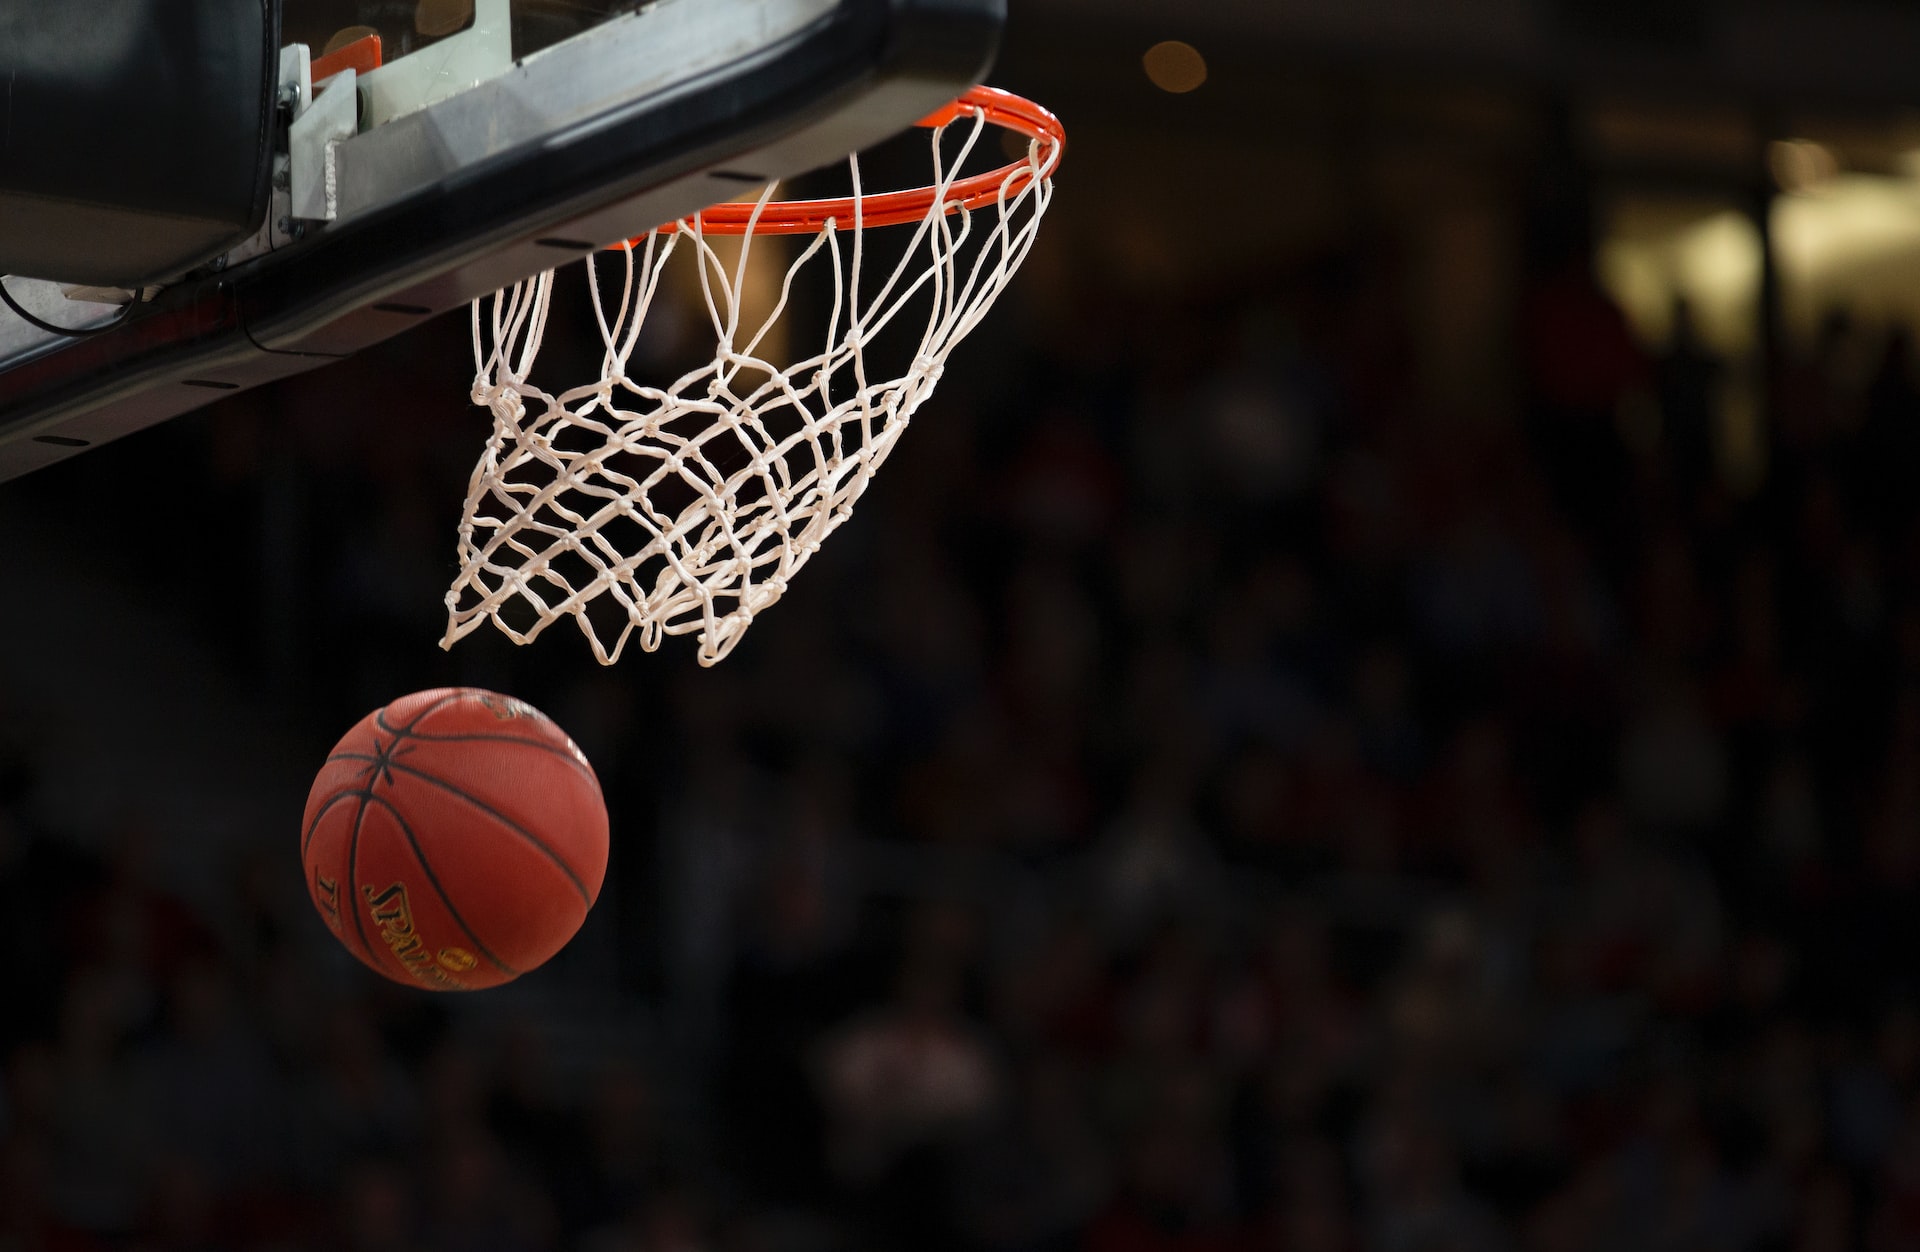 Women's Basketball Betting in Canada | Where to Bet?